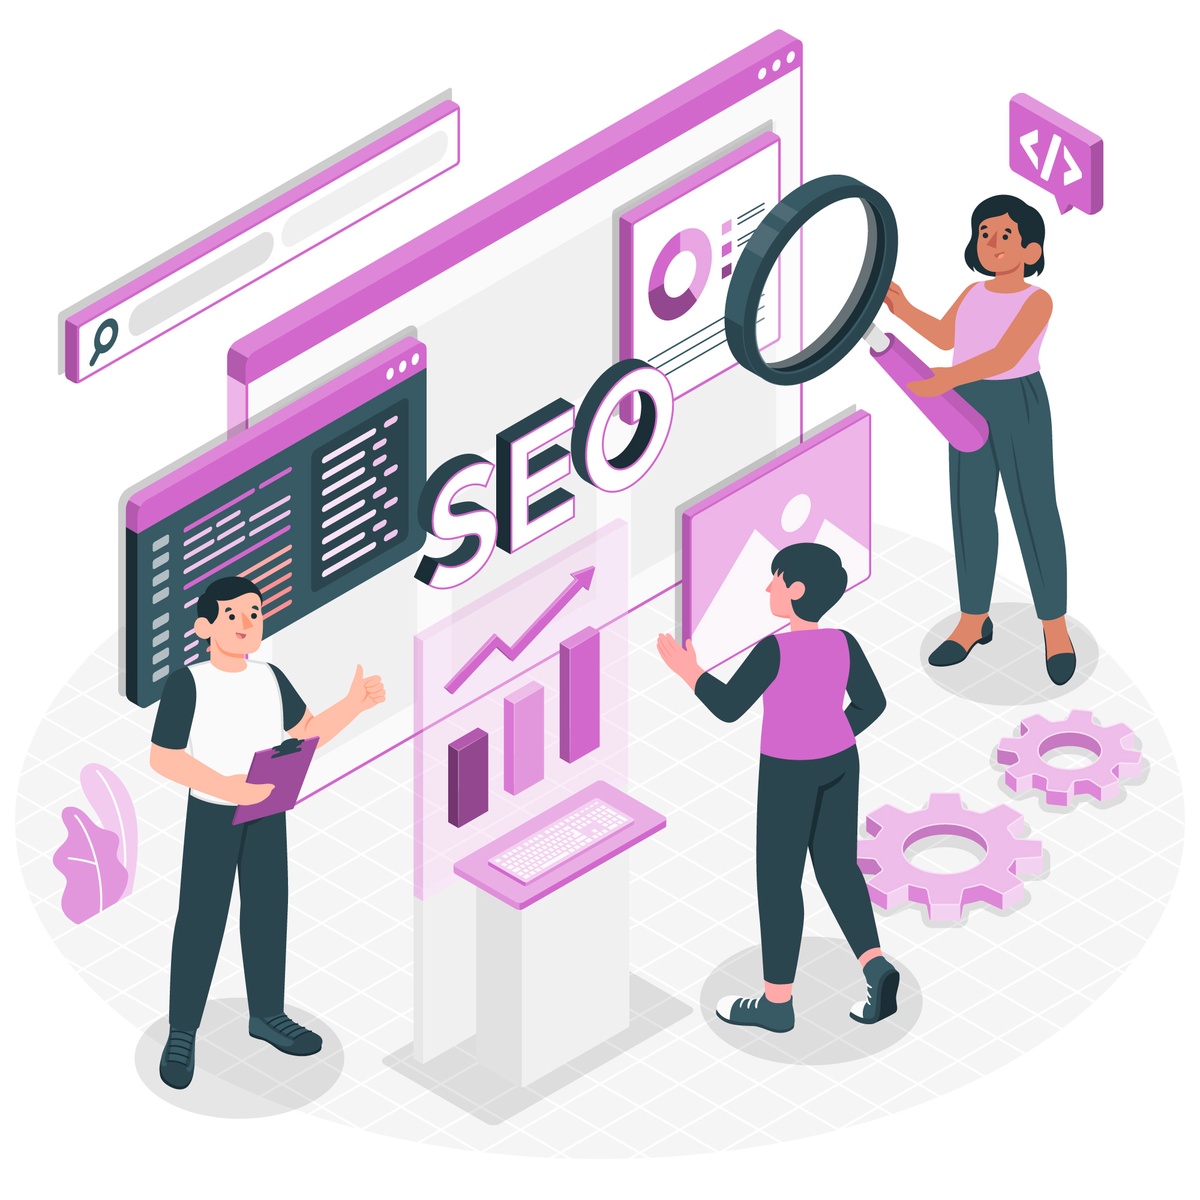 The Ultimate Guide to Choosing the Best SEO Services Agency in Delhi